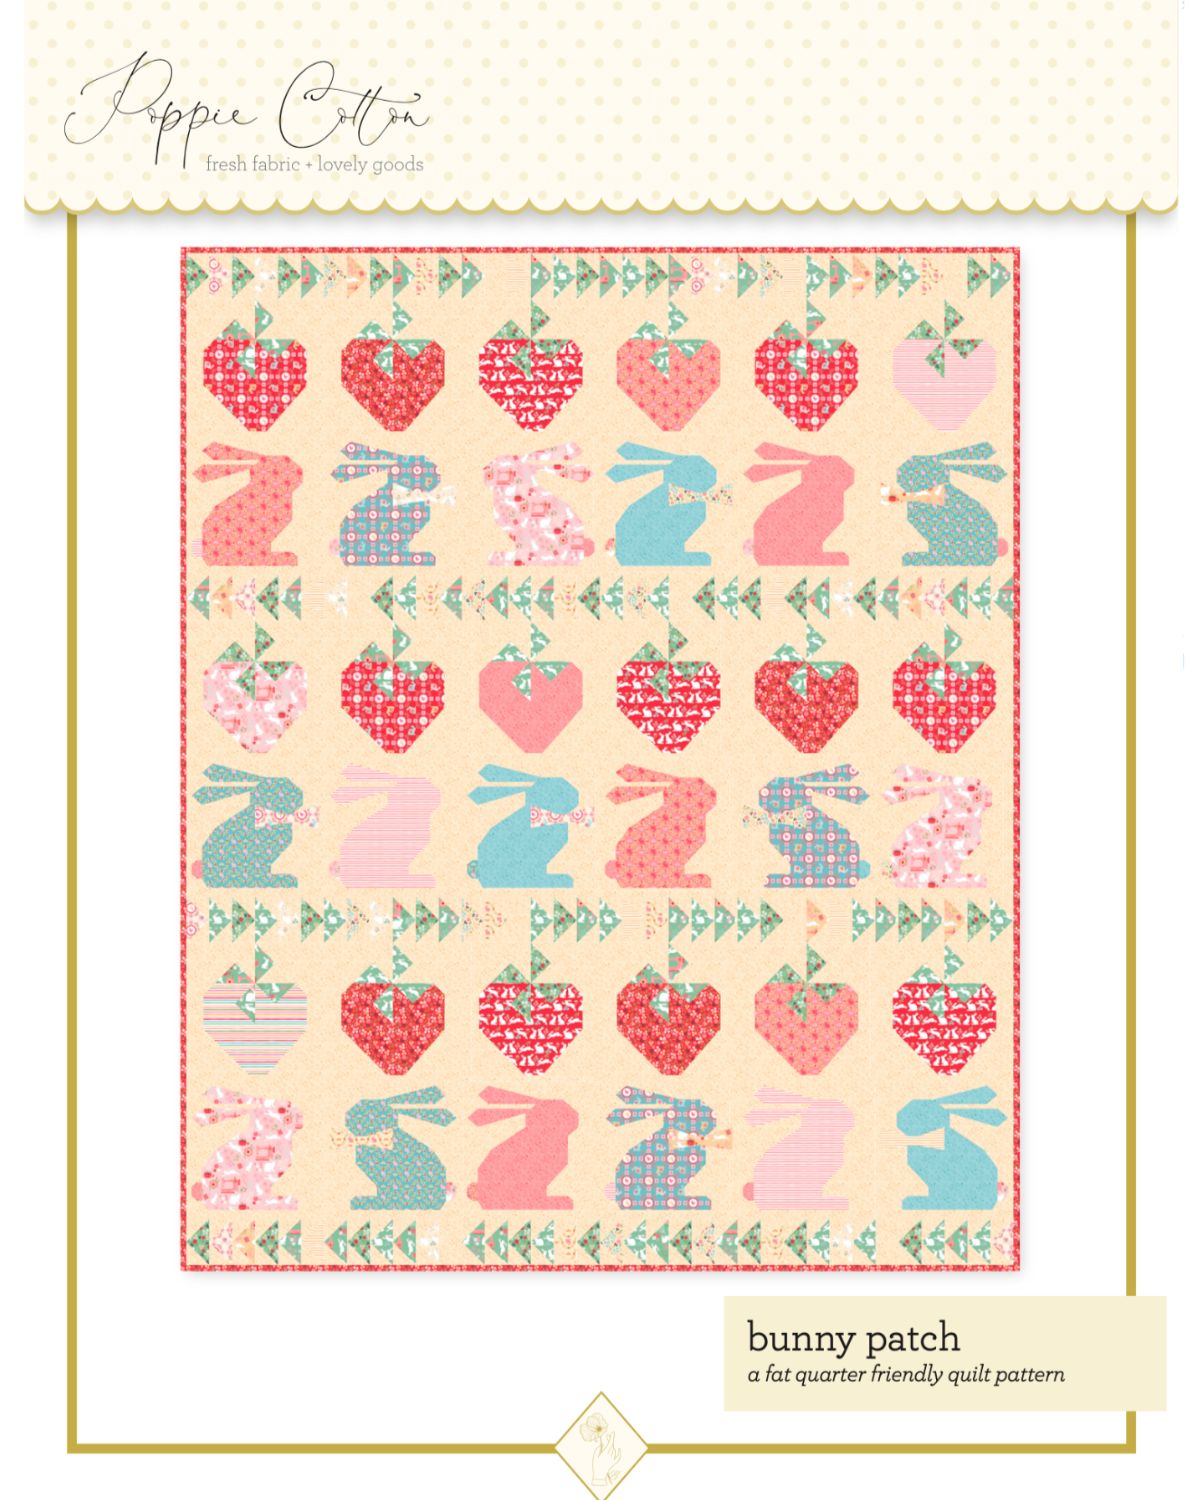 Bunny Patch Quilt Pattern, for the Poppie Patchwork Club Collection